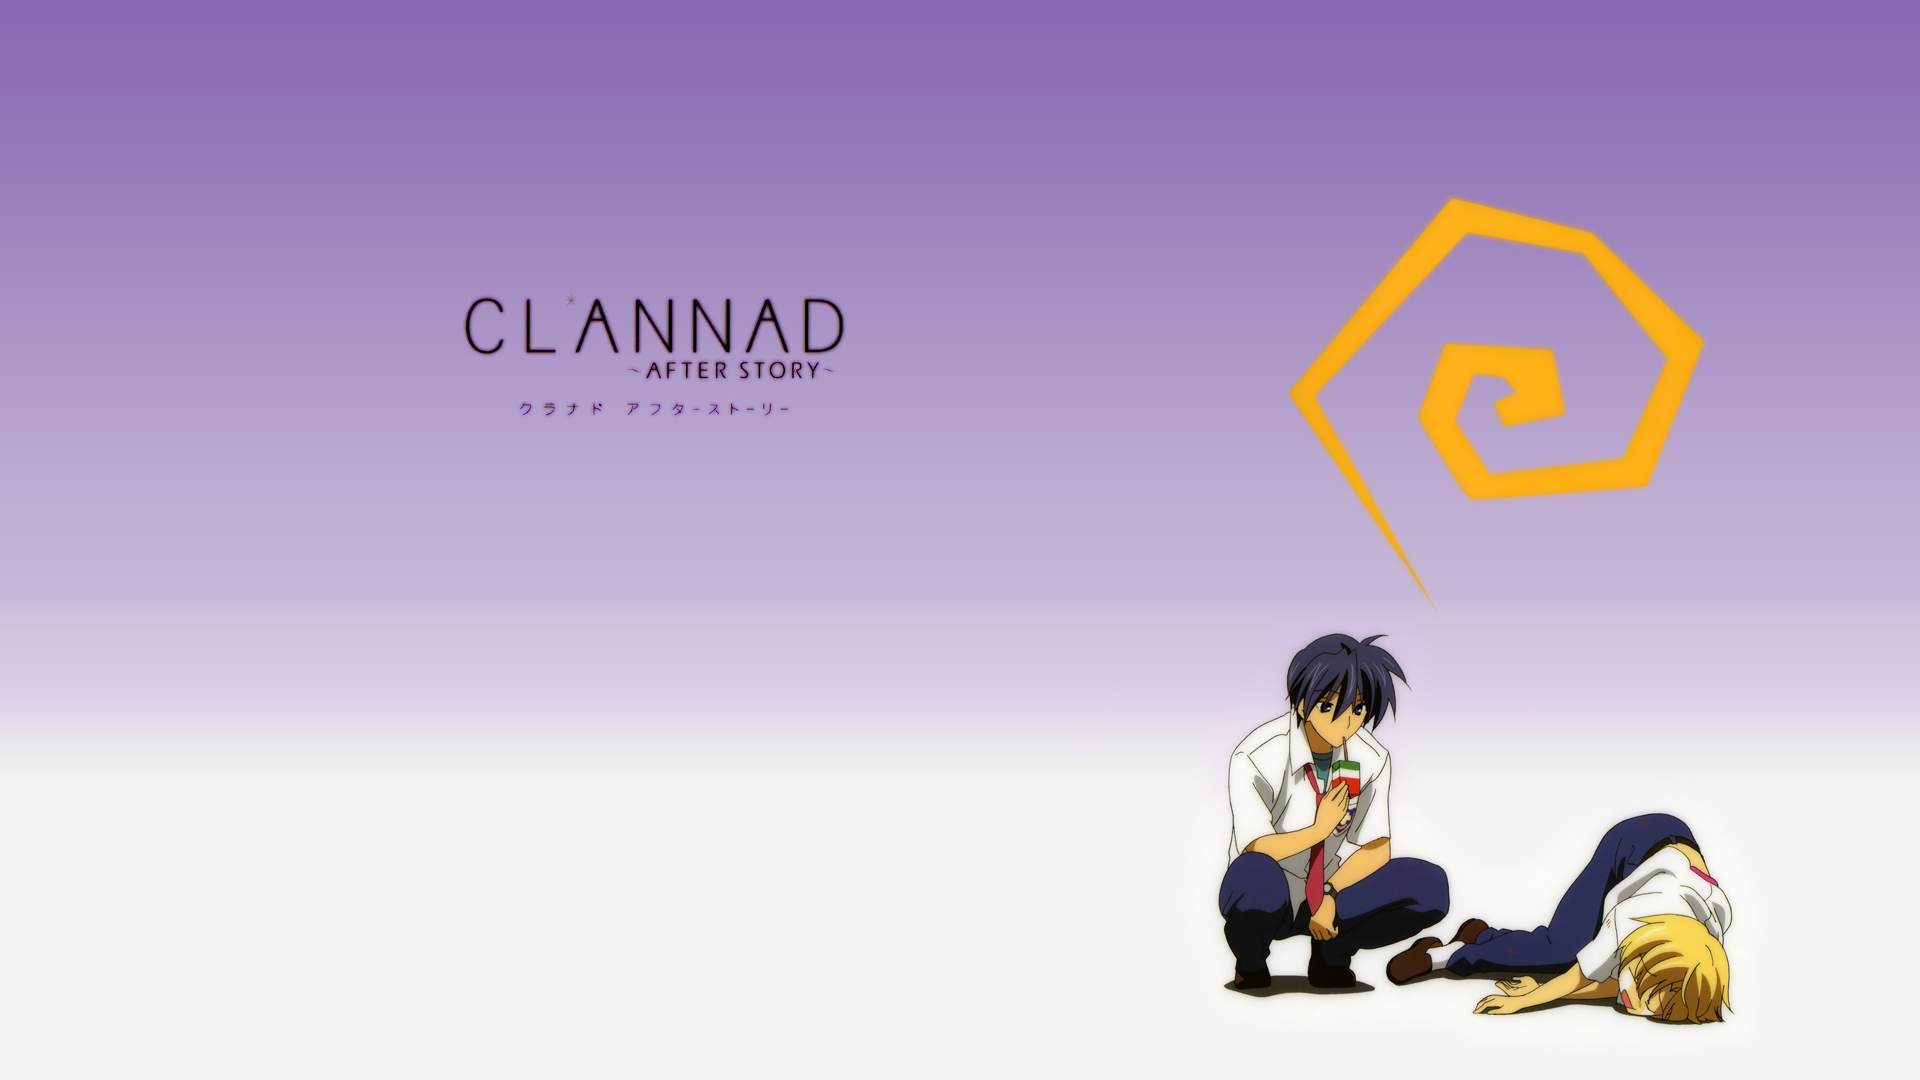 Free Download 84 Clannad Wallpaper 19x1080 Wallpaper Hd Wallpapers 19x1080 For Your Desktop Mobile Tablet Explore 48 Clannad Wallpaper Hd Clannad Wallpaper Hd Clannad Wallpapers Clannad Wallpaper Iphone